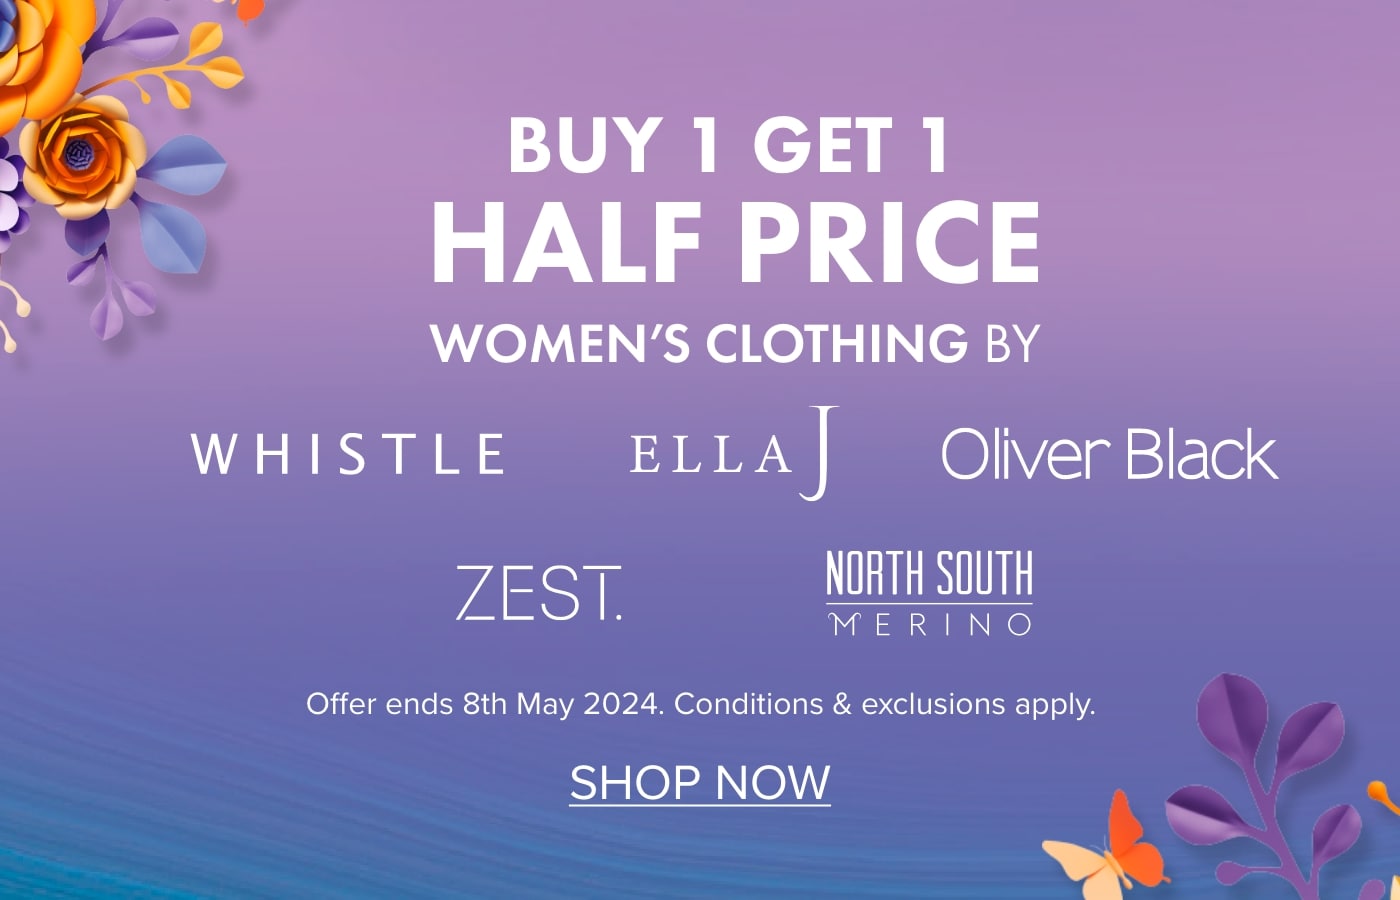 BUY 1 GET 1 HALF PRICE on Women's Clothing by Whistle, Ella J, Zest, Oliver Black & North South Merino